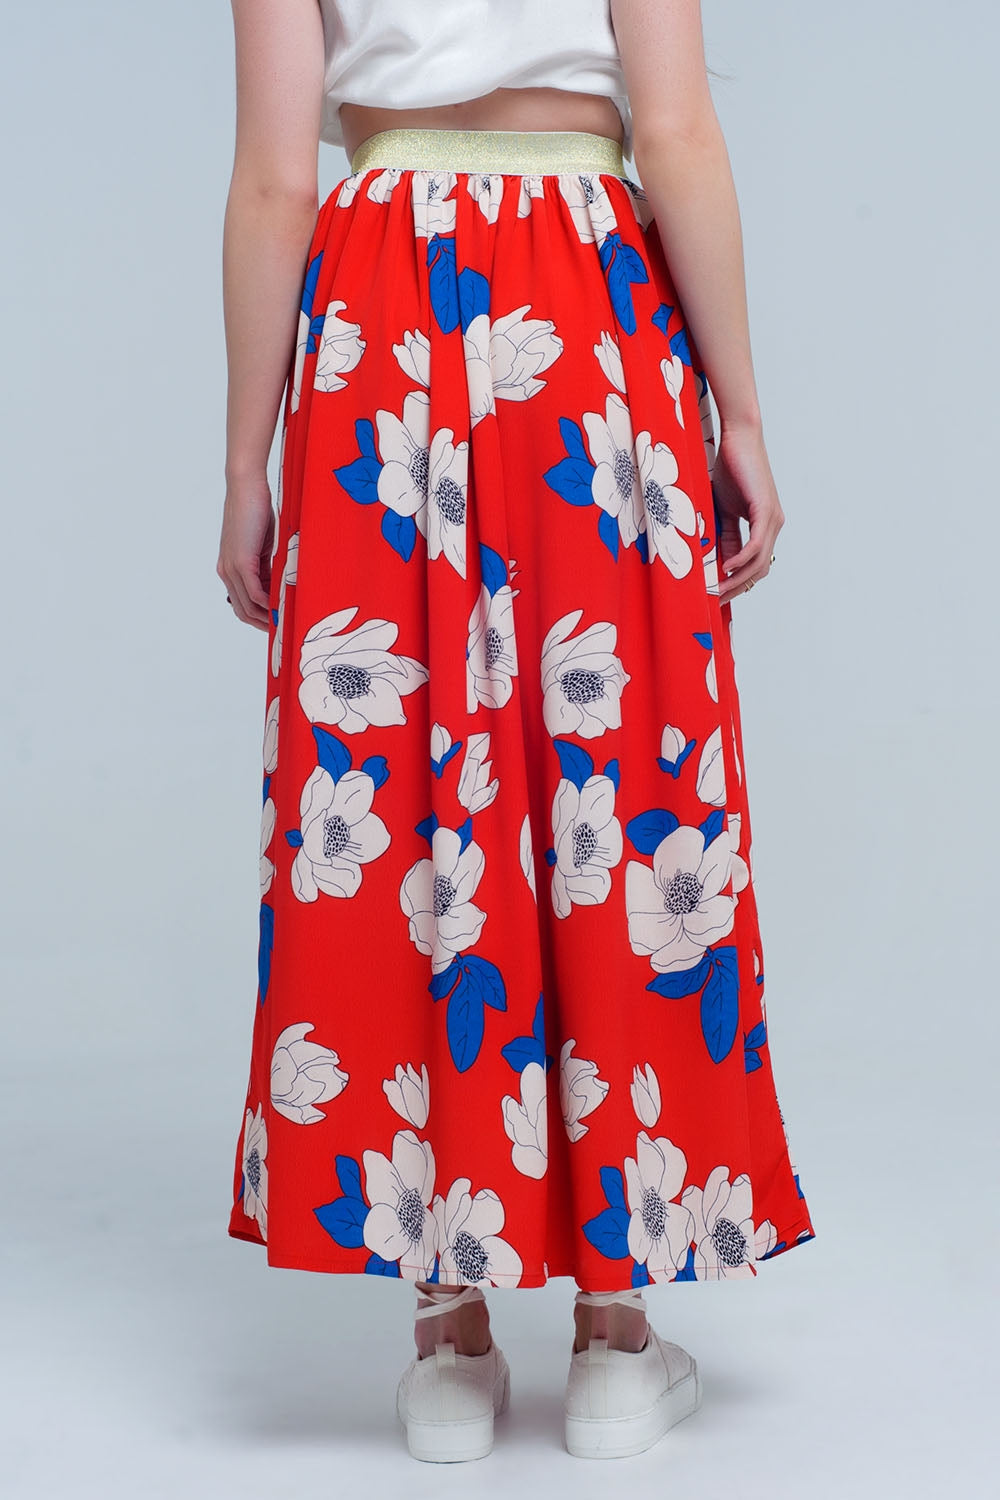 Red long skirt with printed flowers - Szua Store